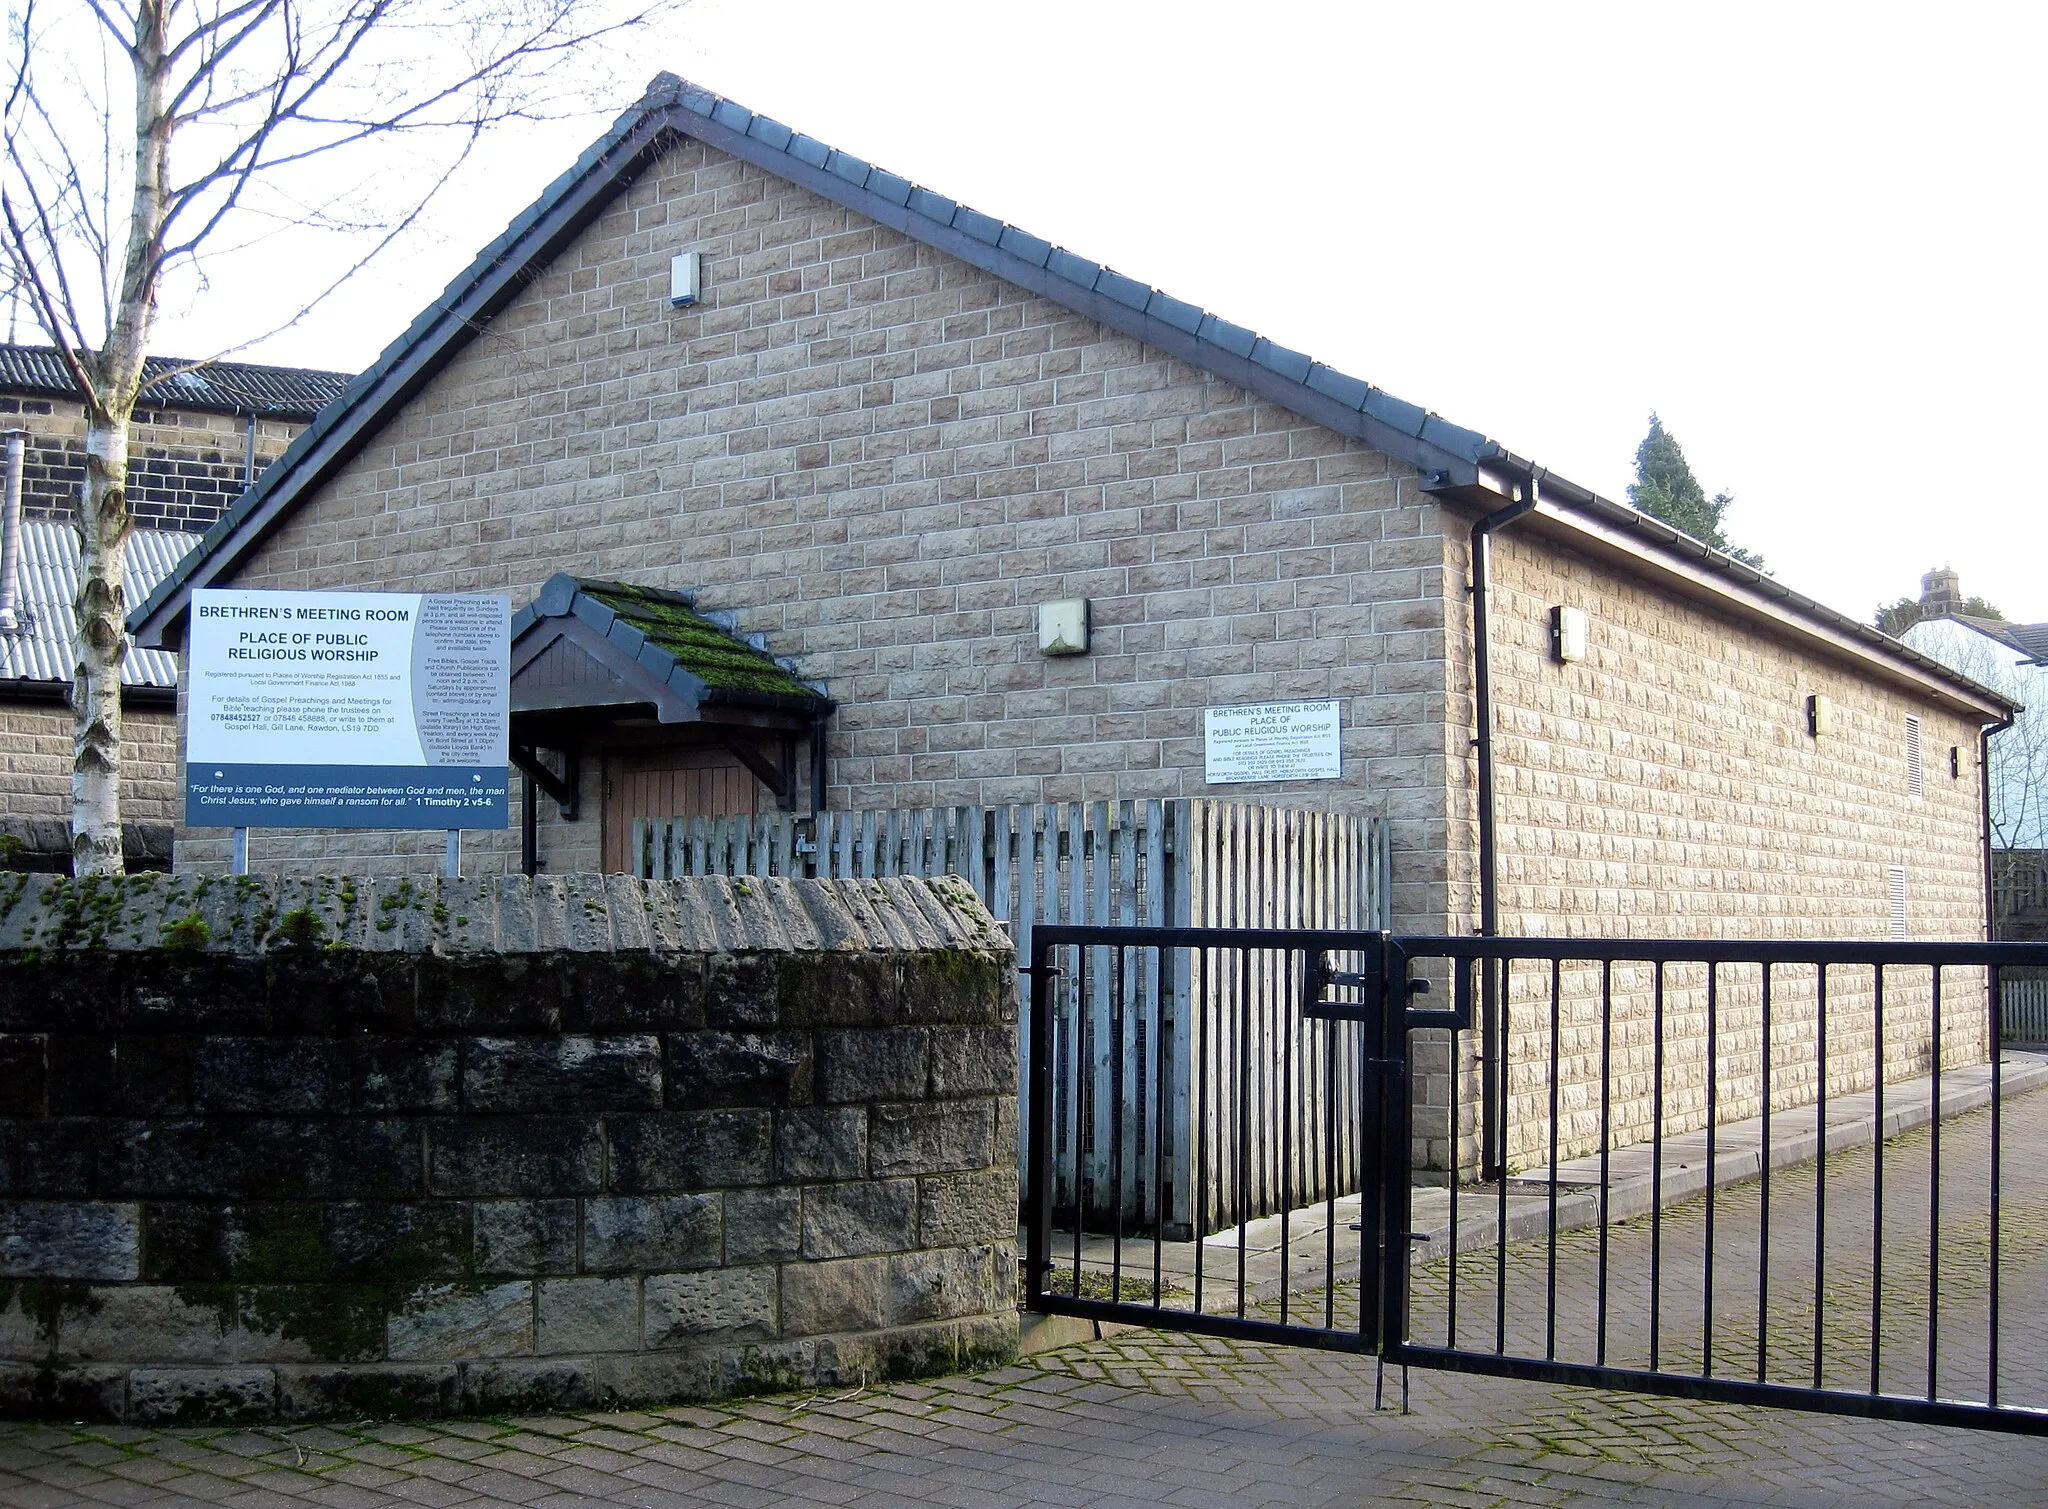 Photo showing: Brethren's Meeting Room, Gill Lane, Yeadon LS19.  Single storey stone building with sloped roof.